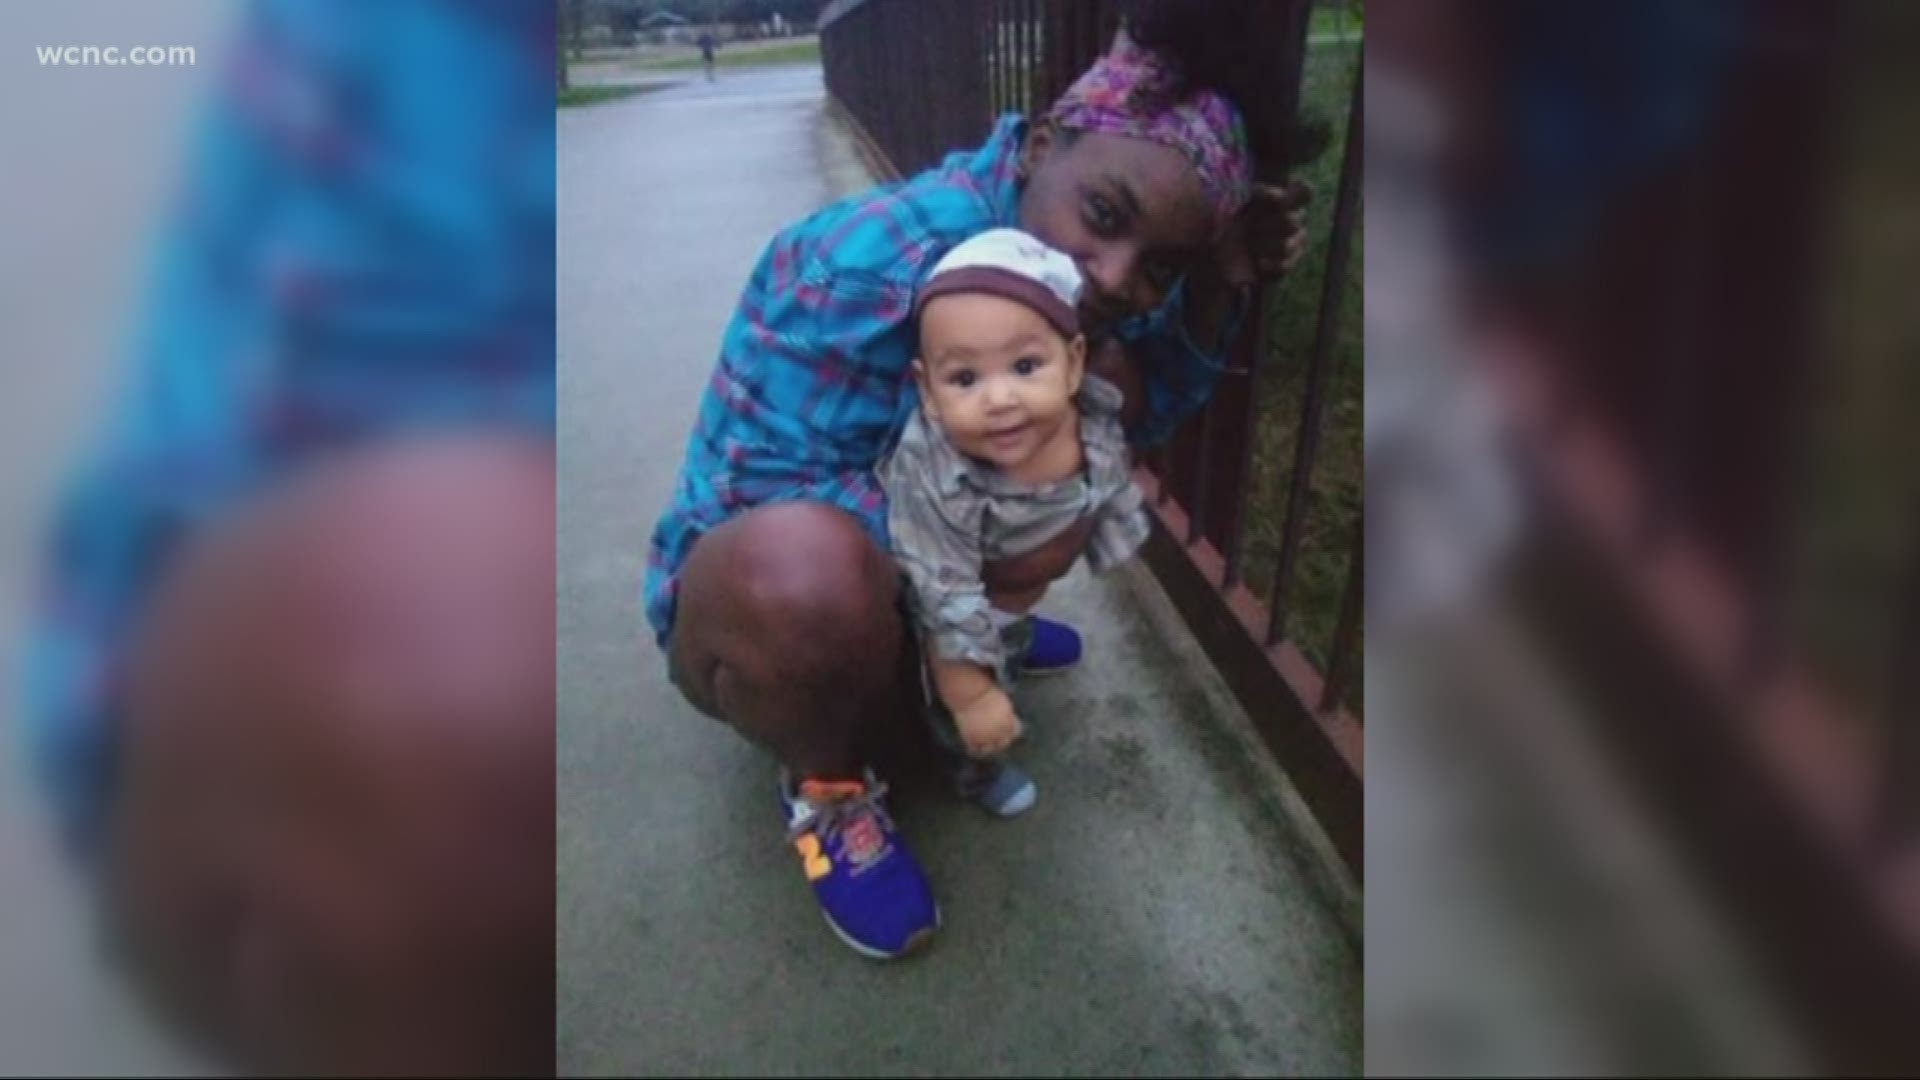 The Charlotte-Mecklenburg Police Department confirmed the body found in a southeast Charlotte cemetery is that of a missing 6-month-old from Matthews.